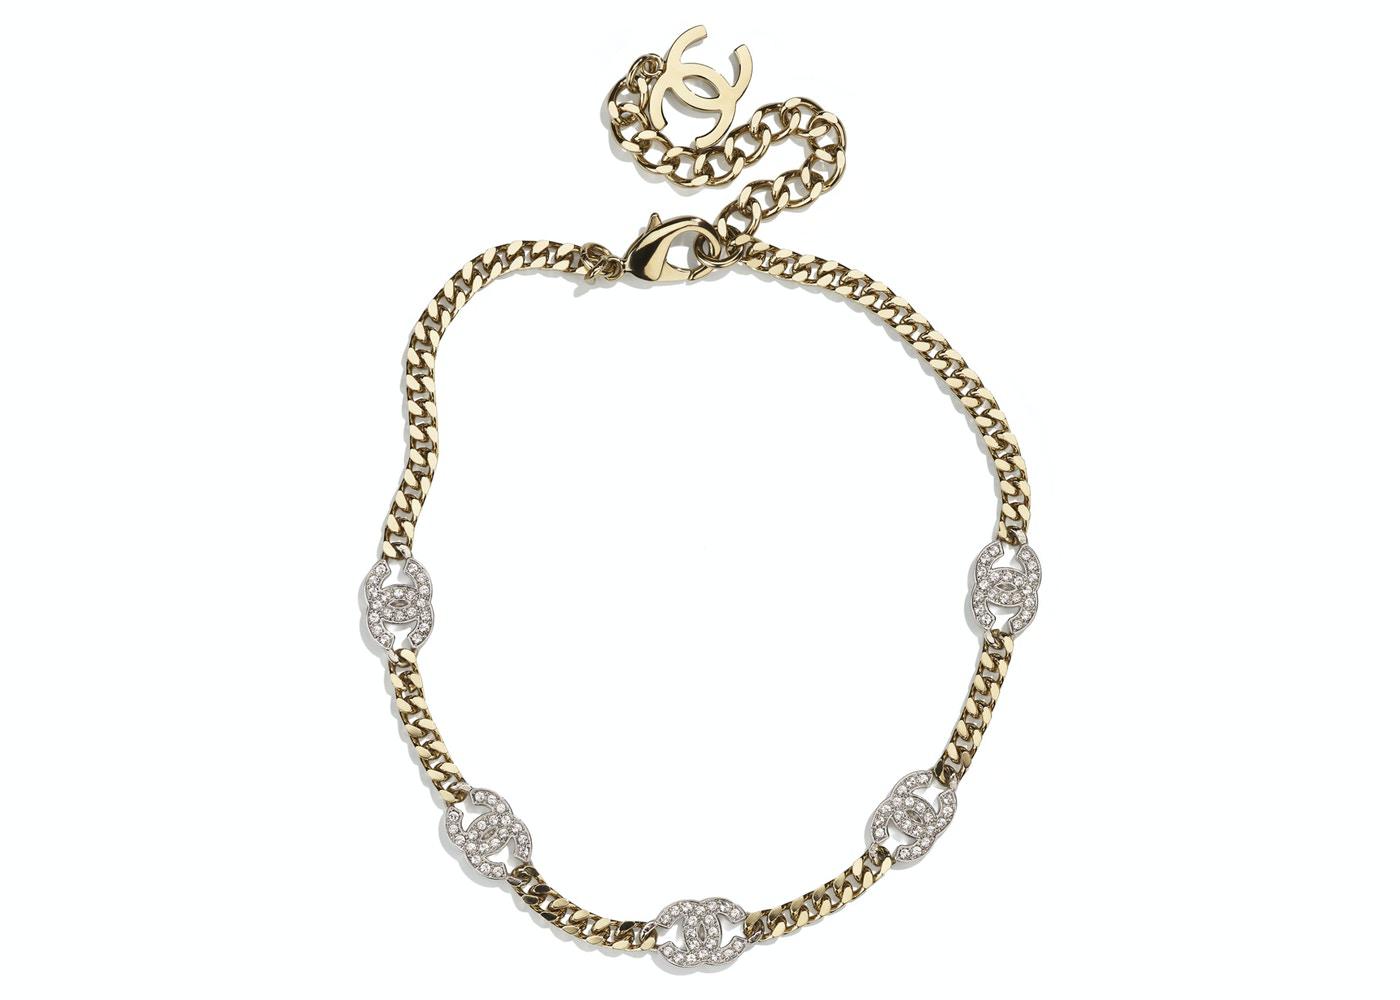 Interlocking Choker Necklace Gold/Silver/Crystal by CHANEL